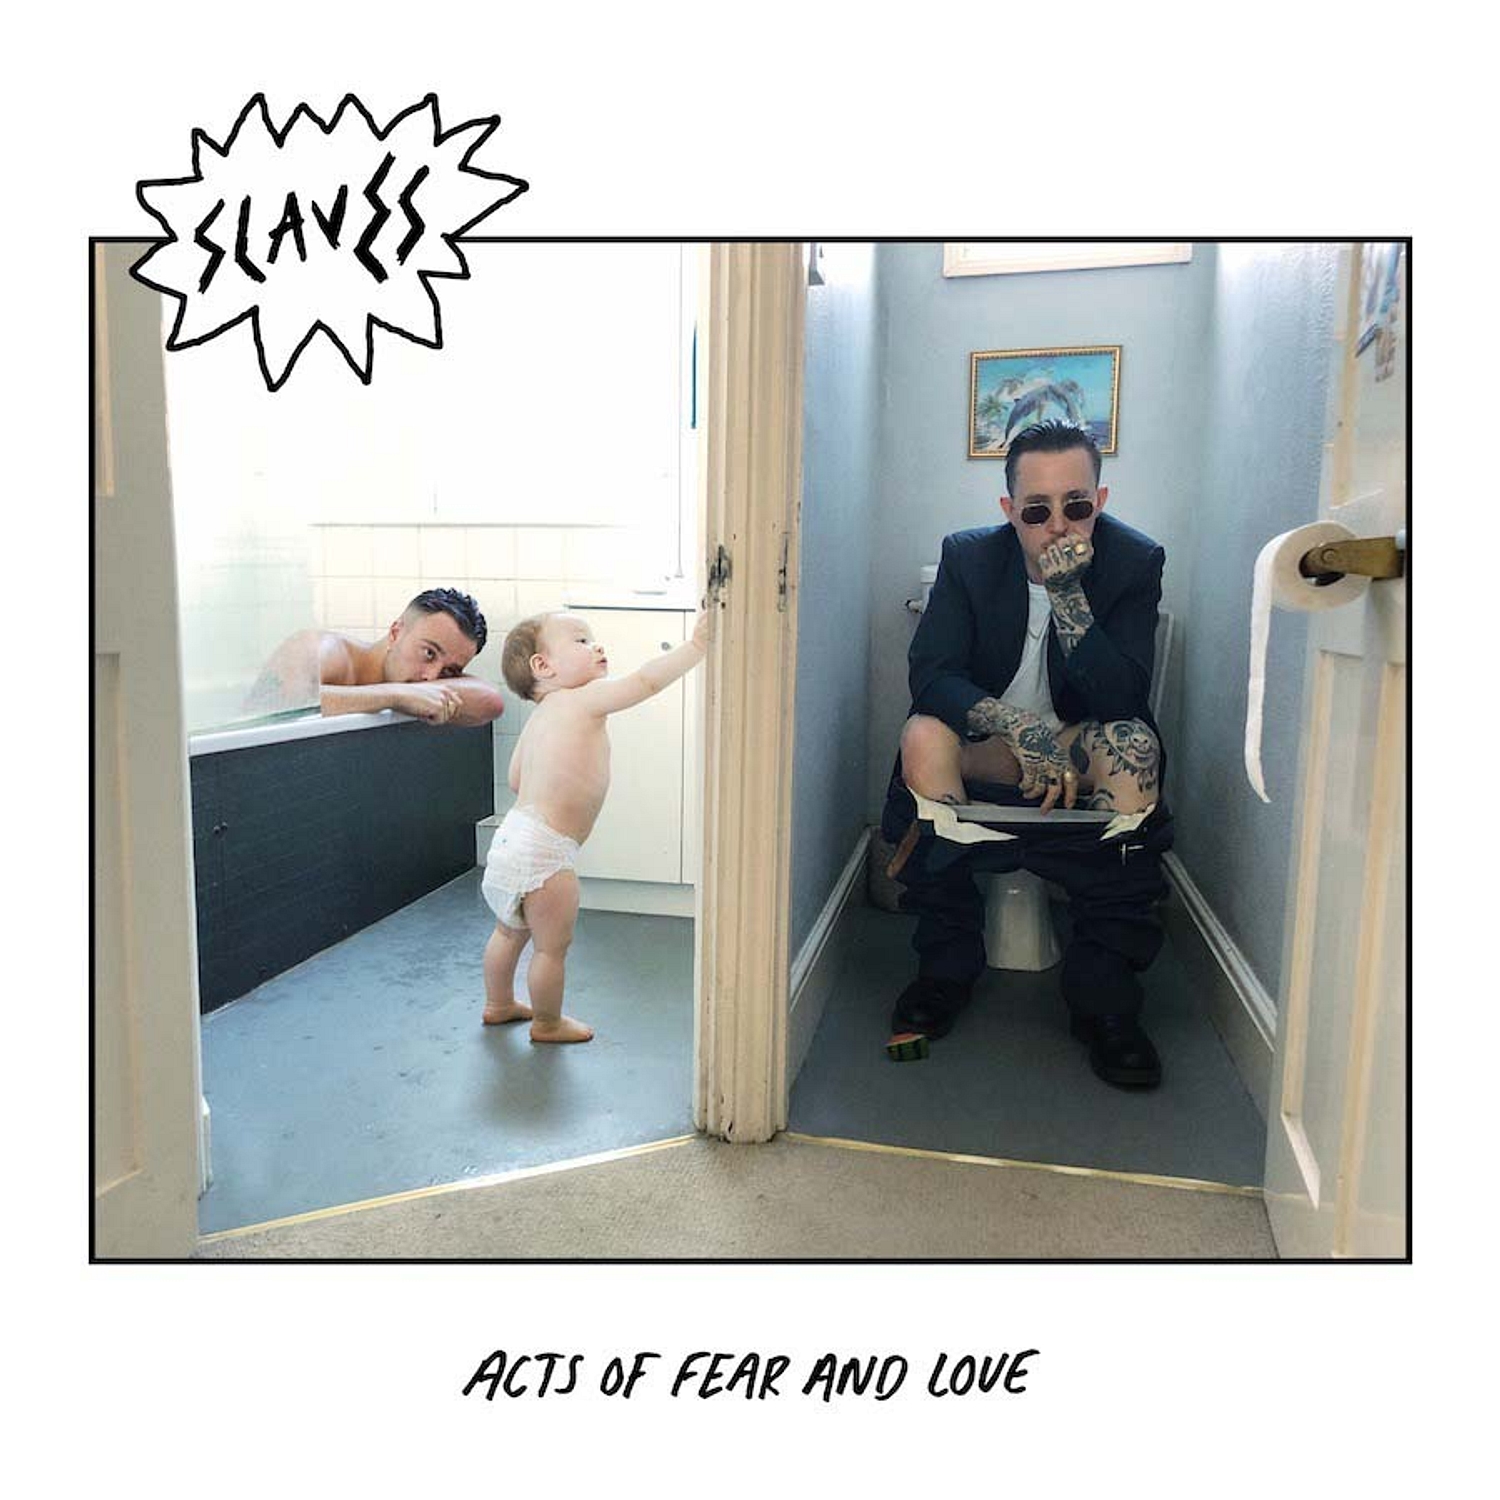 Slaves announce new album 'Acts Of Fear And Love'